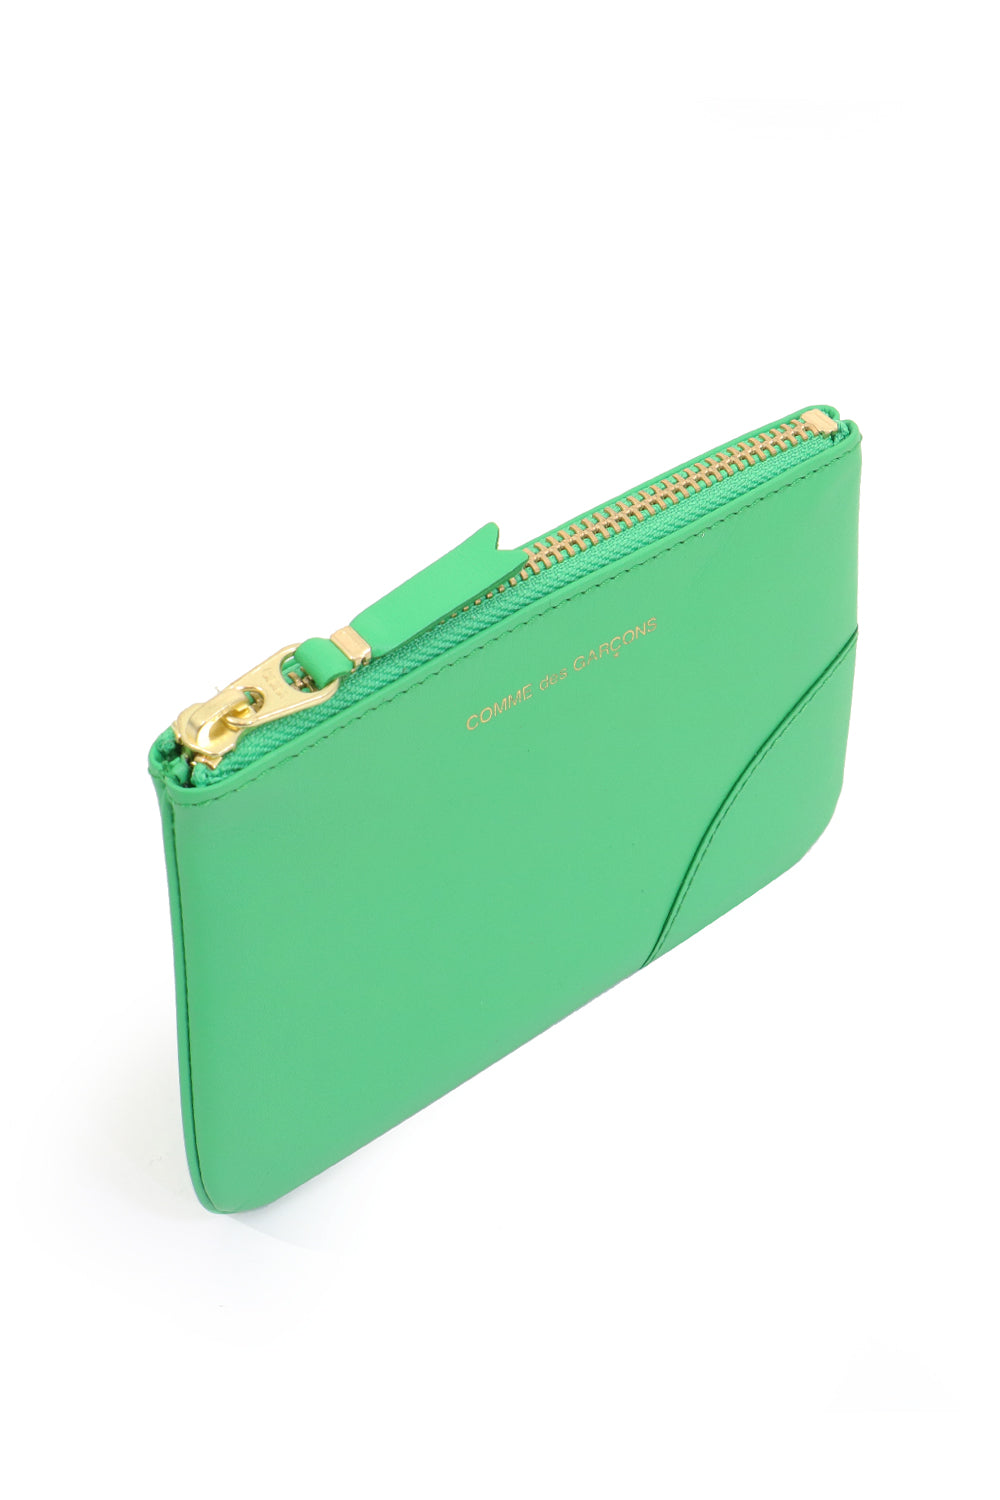 COMME DES GARCONS SMALL CLASSIC LEATHER POUCH GREEN – Parlour X